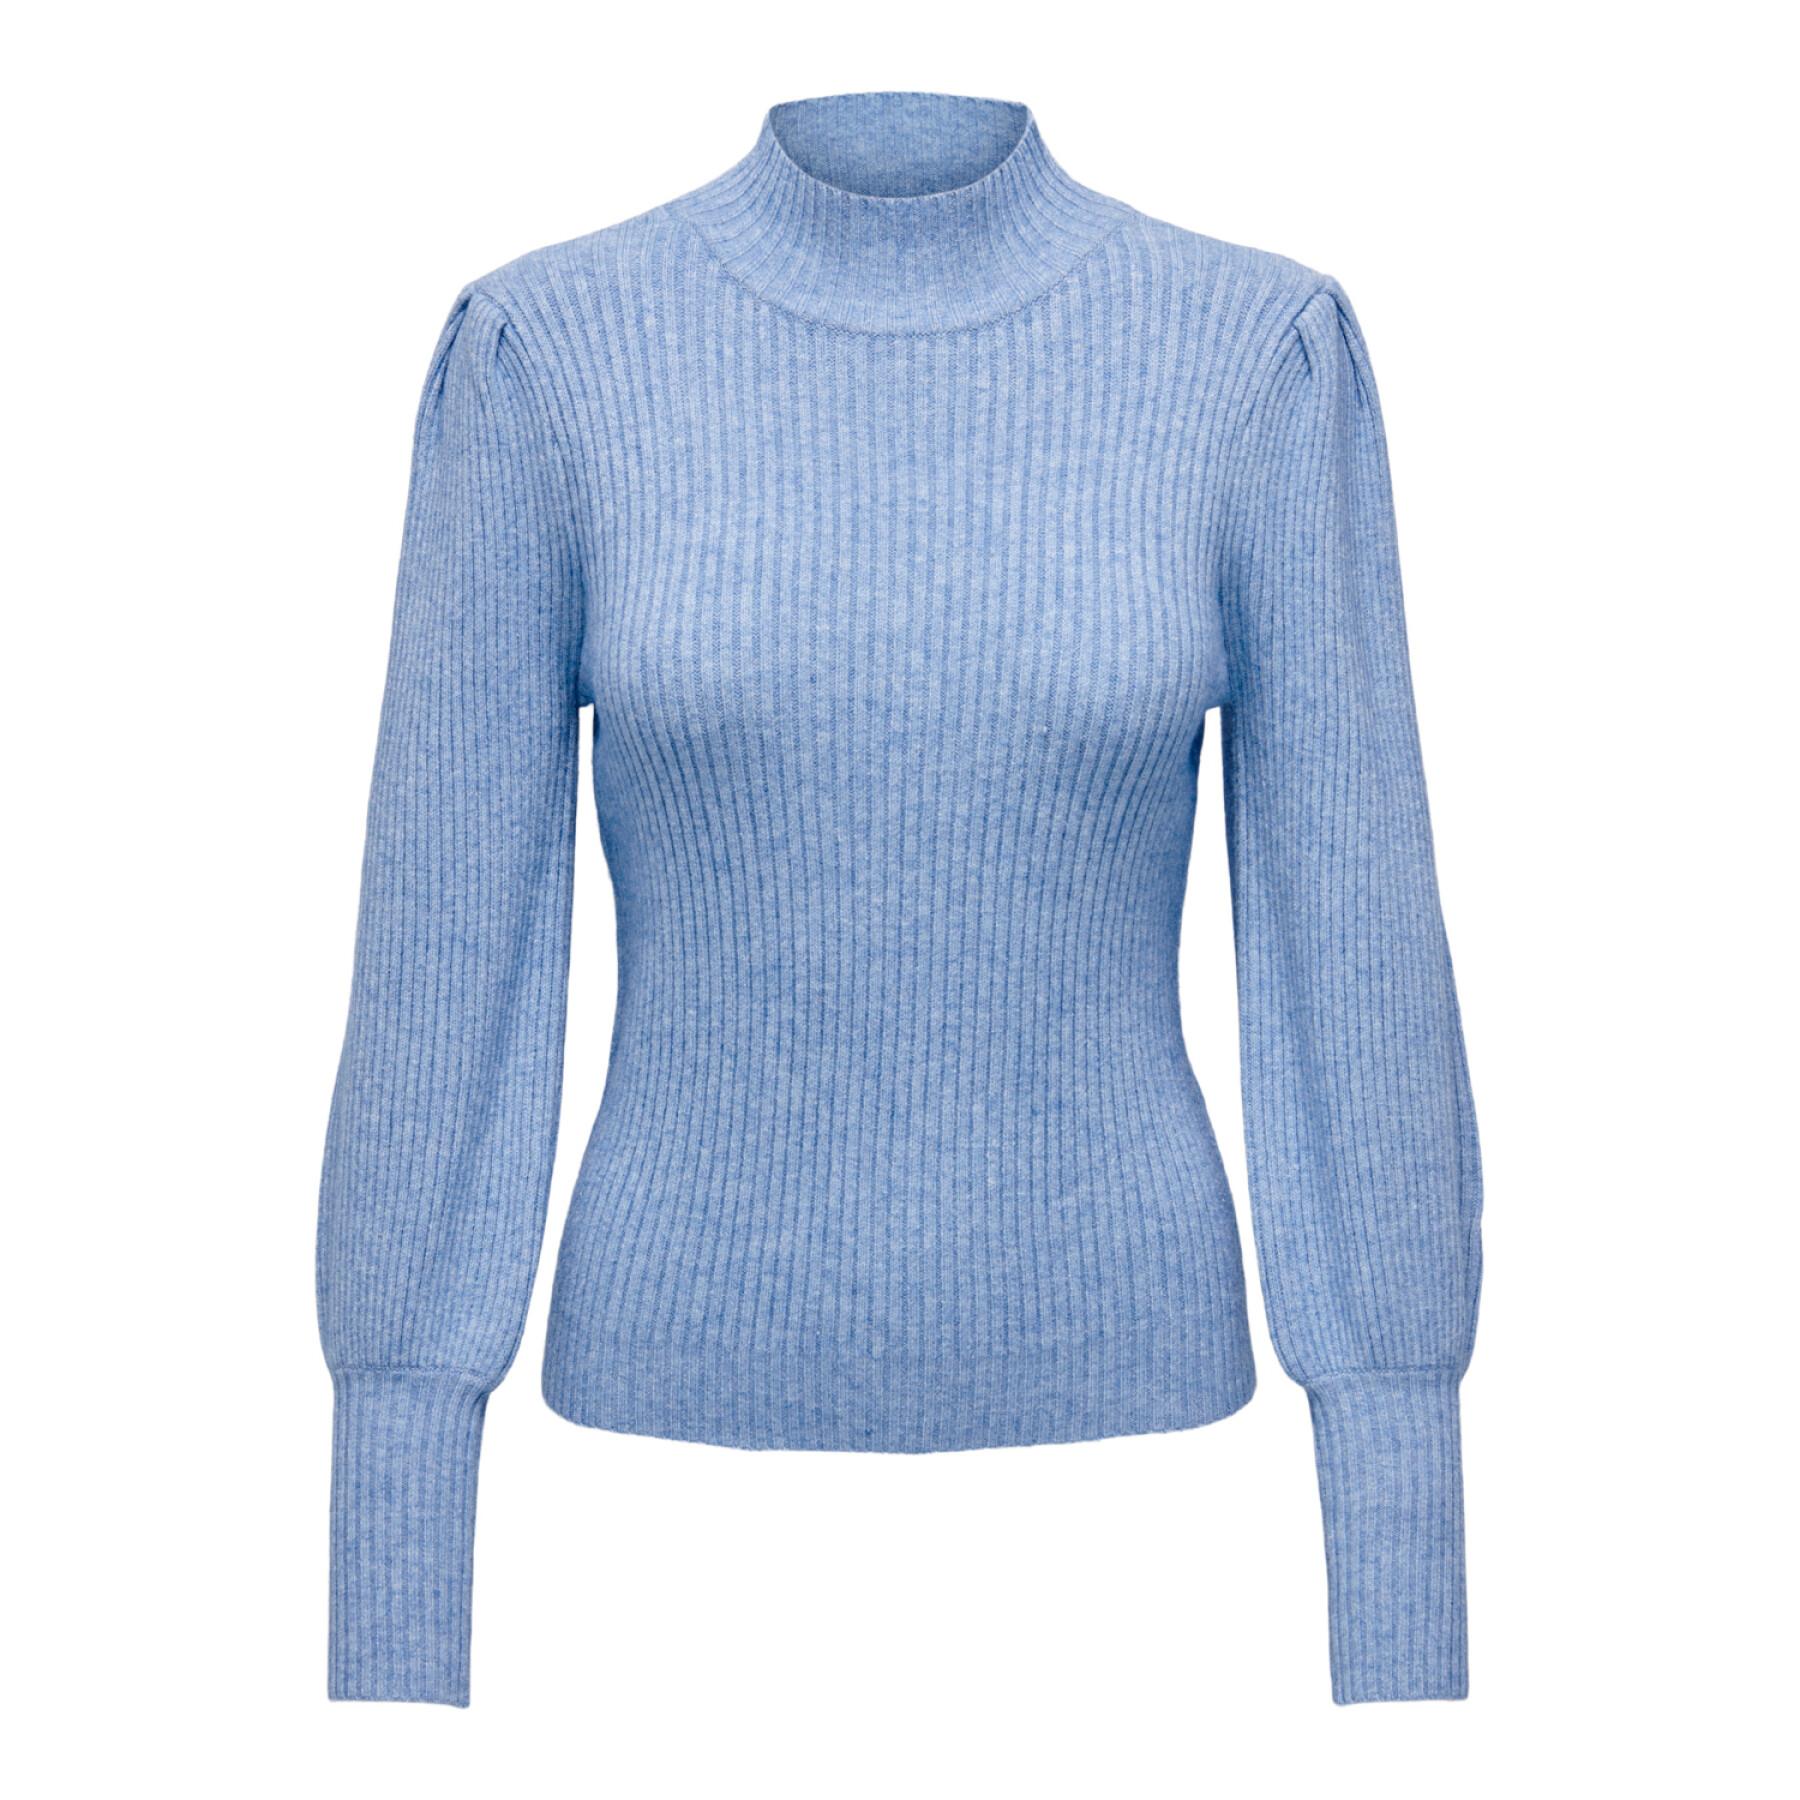 Women's stand-up collar sweater Only Katia